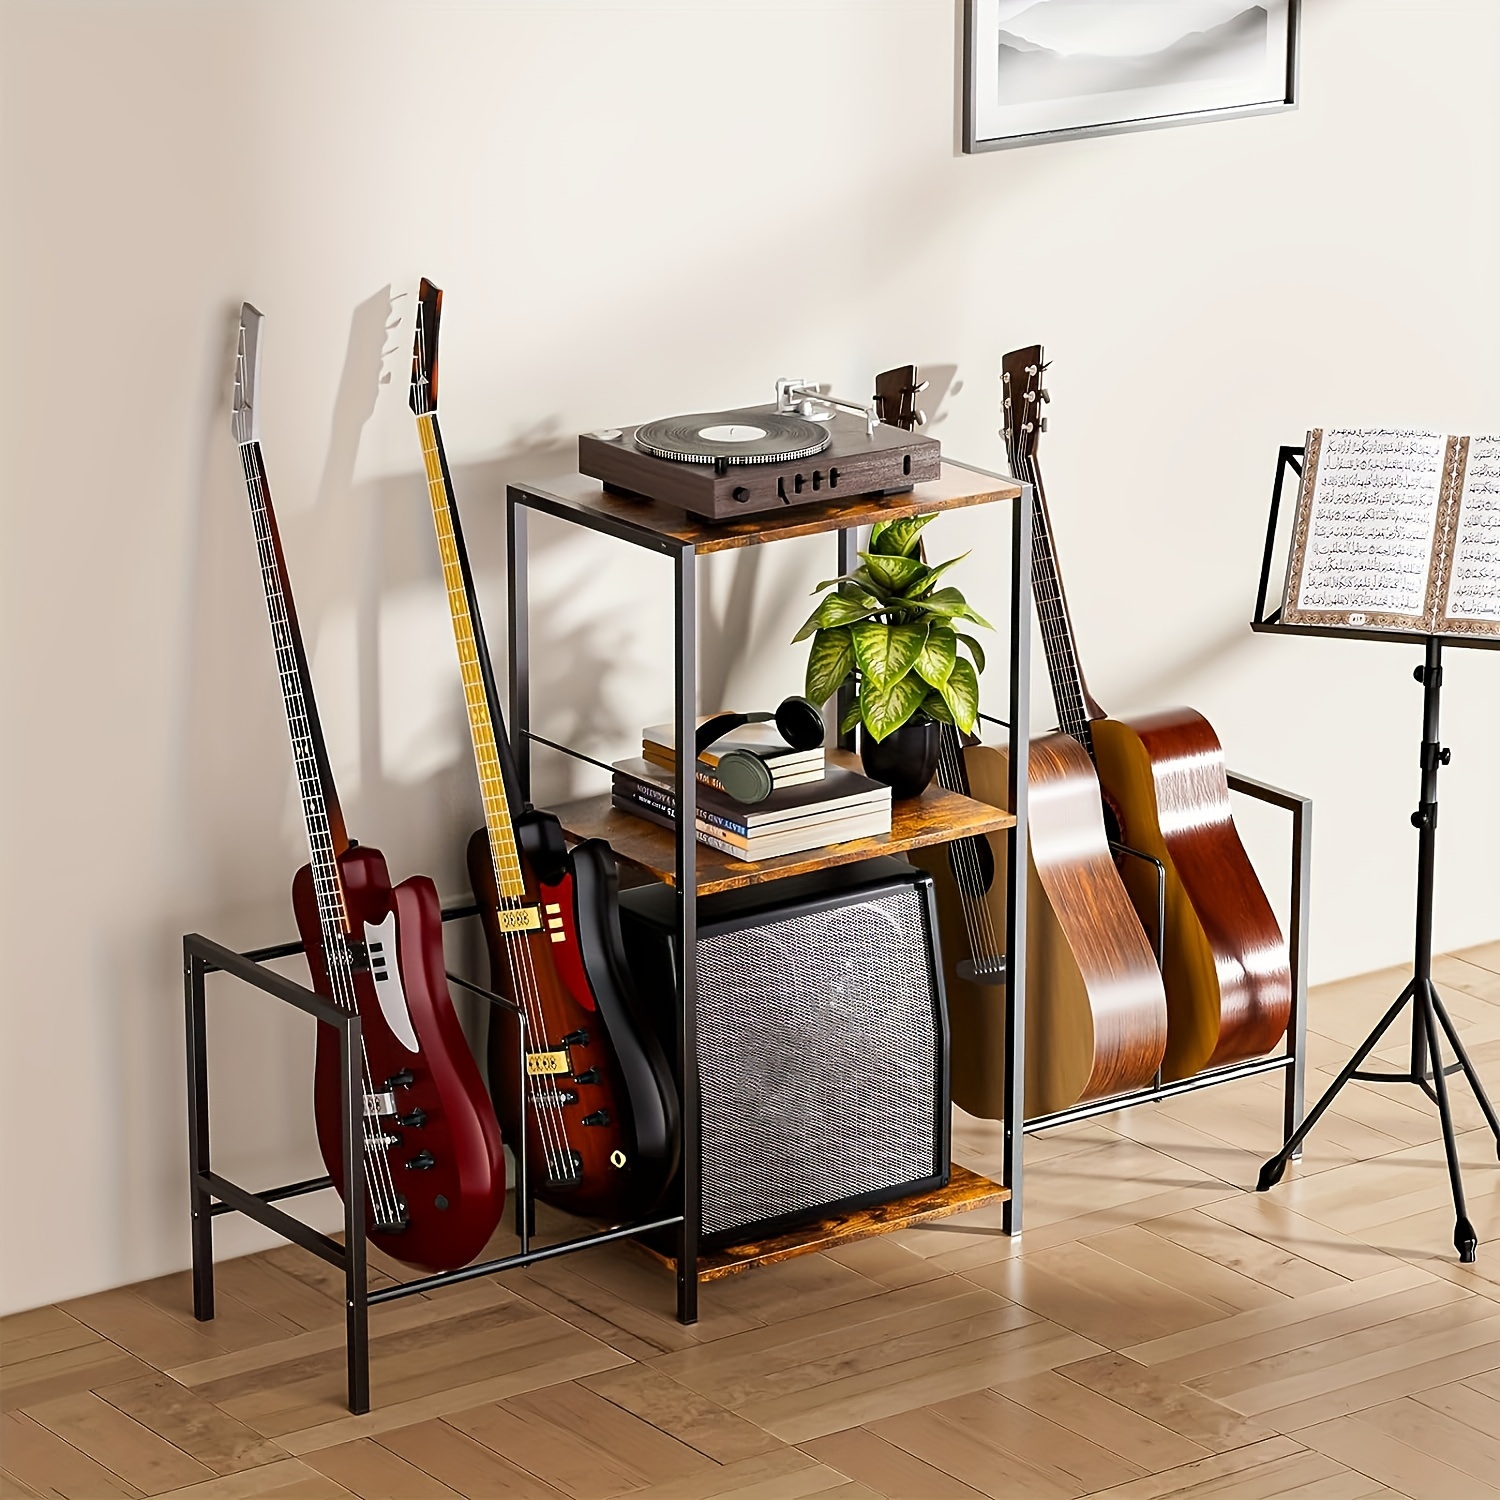 Hercules - Support Guitare Stand 412b Stands Guitare 